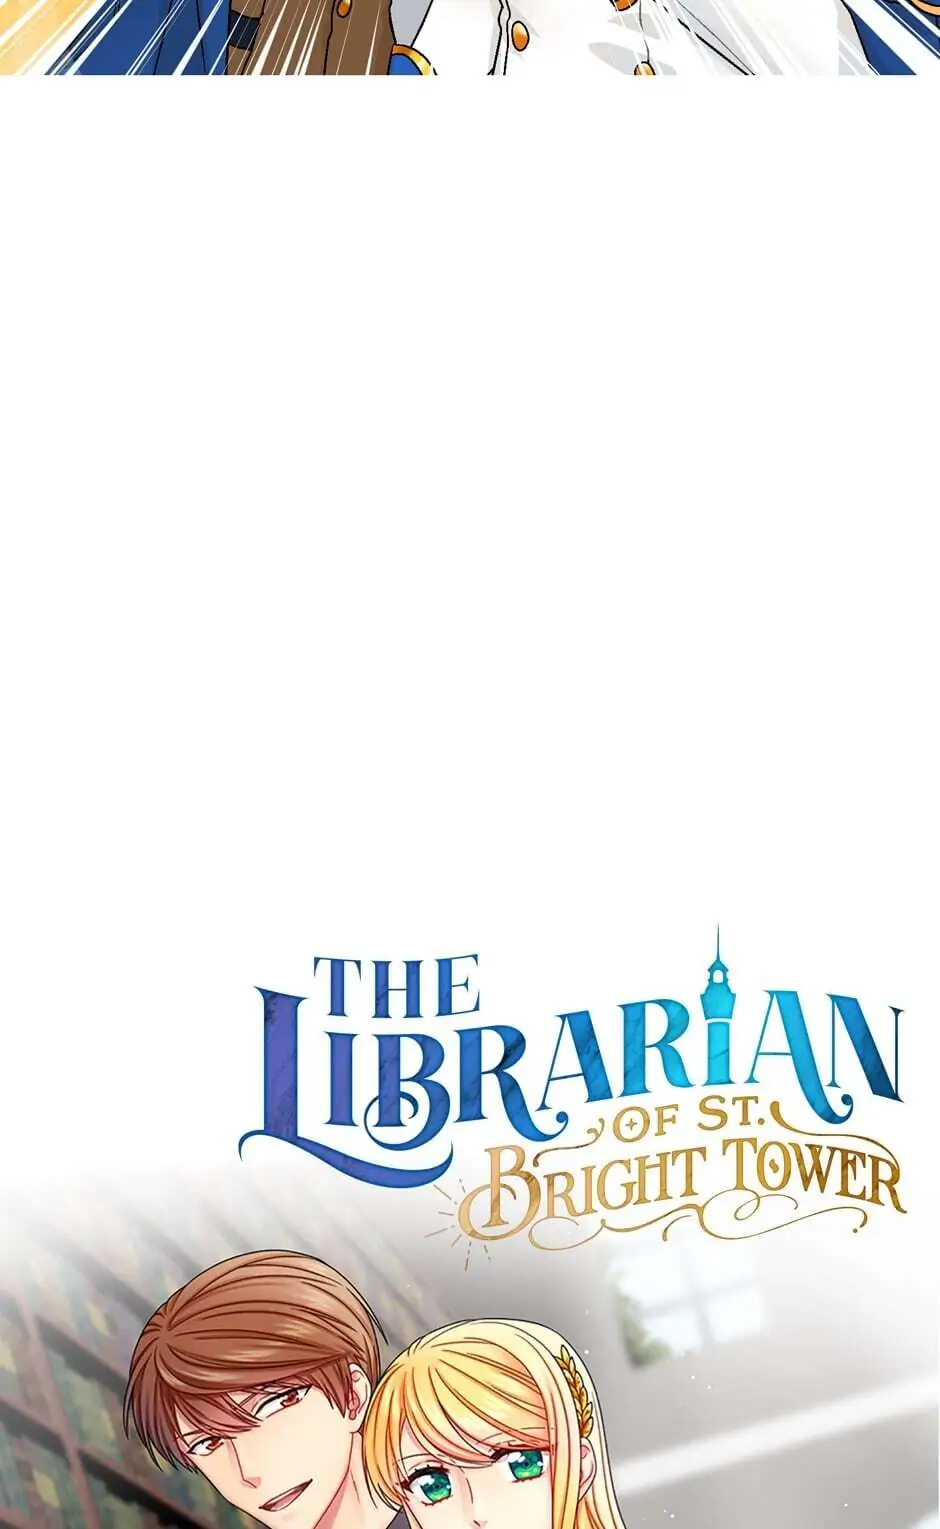 The Magic Tower Librarian chapter 68